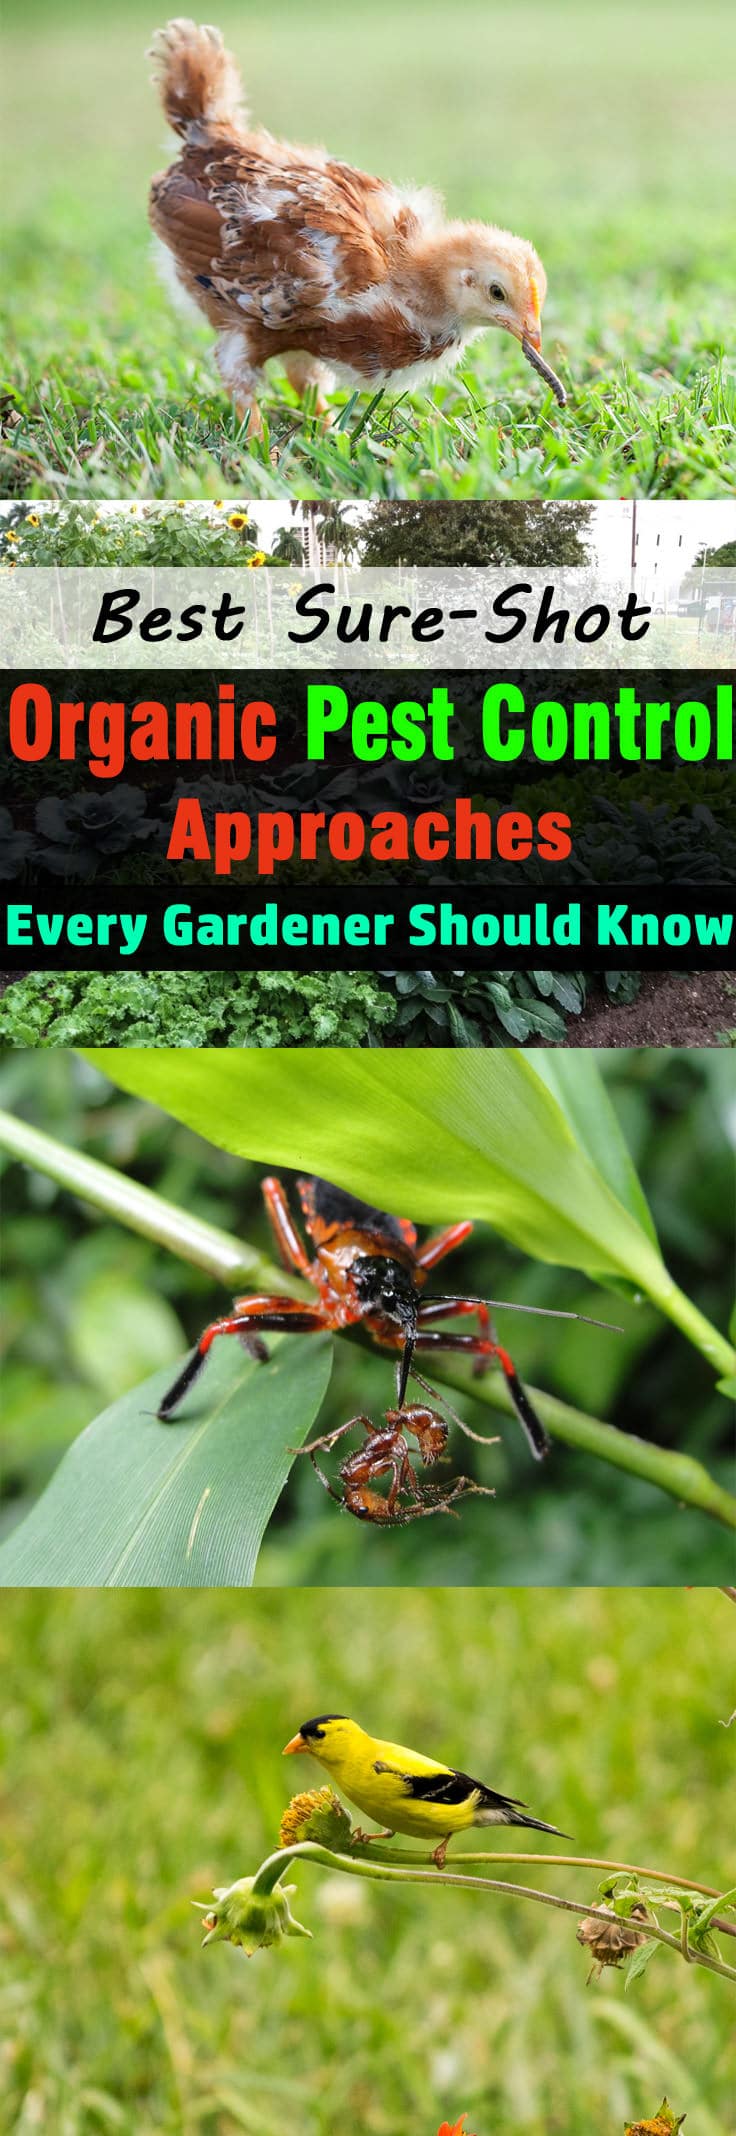 best-Sure-Shot-Organic-Pest-Control-Approaches-Every-Gardener-Should-Know-2.jpg